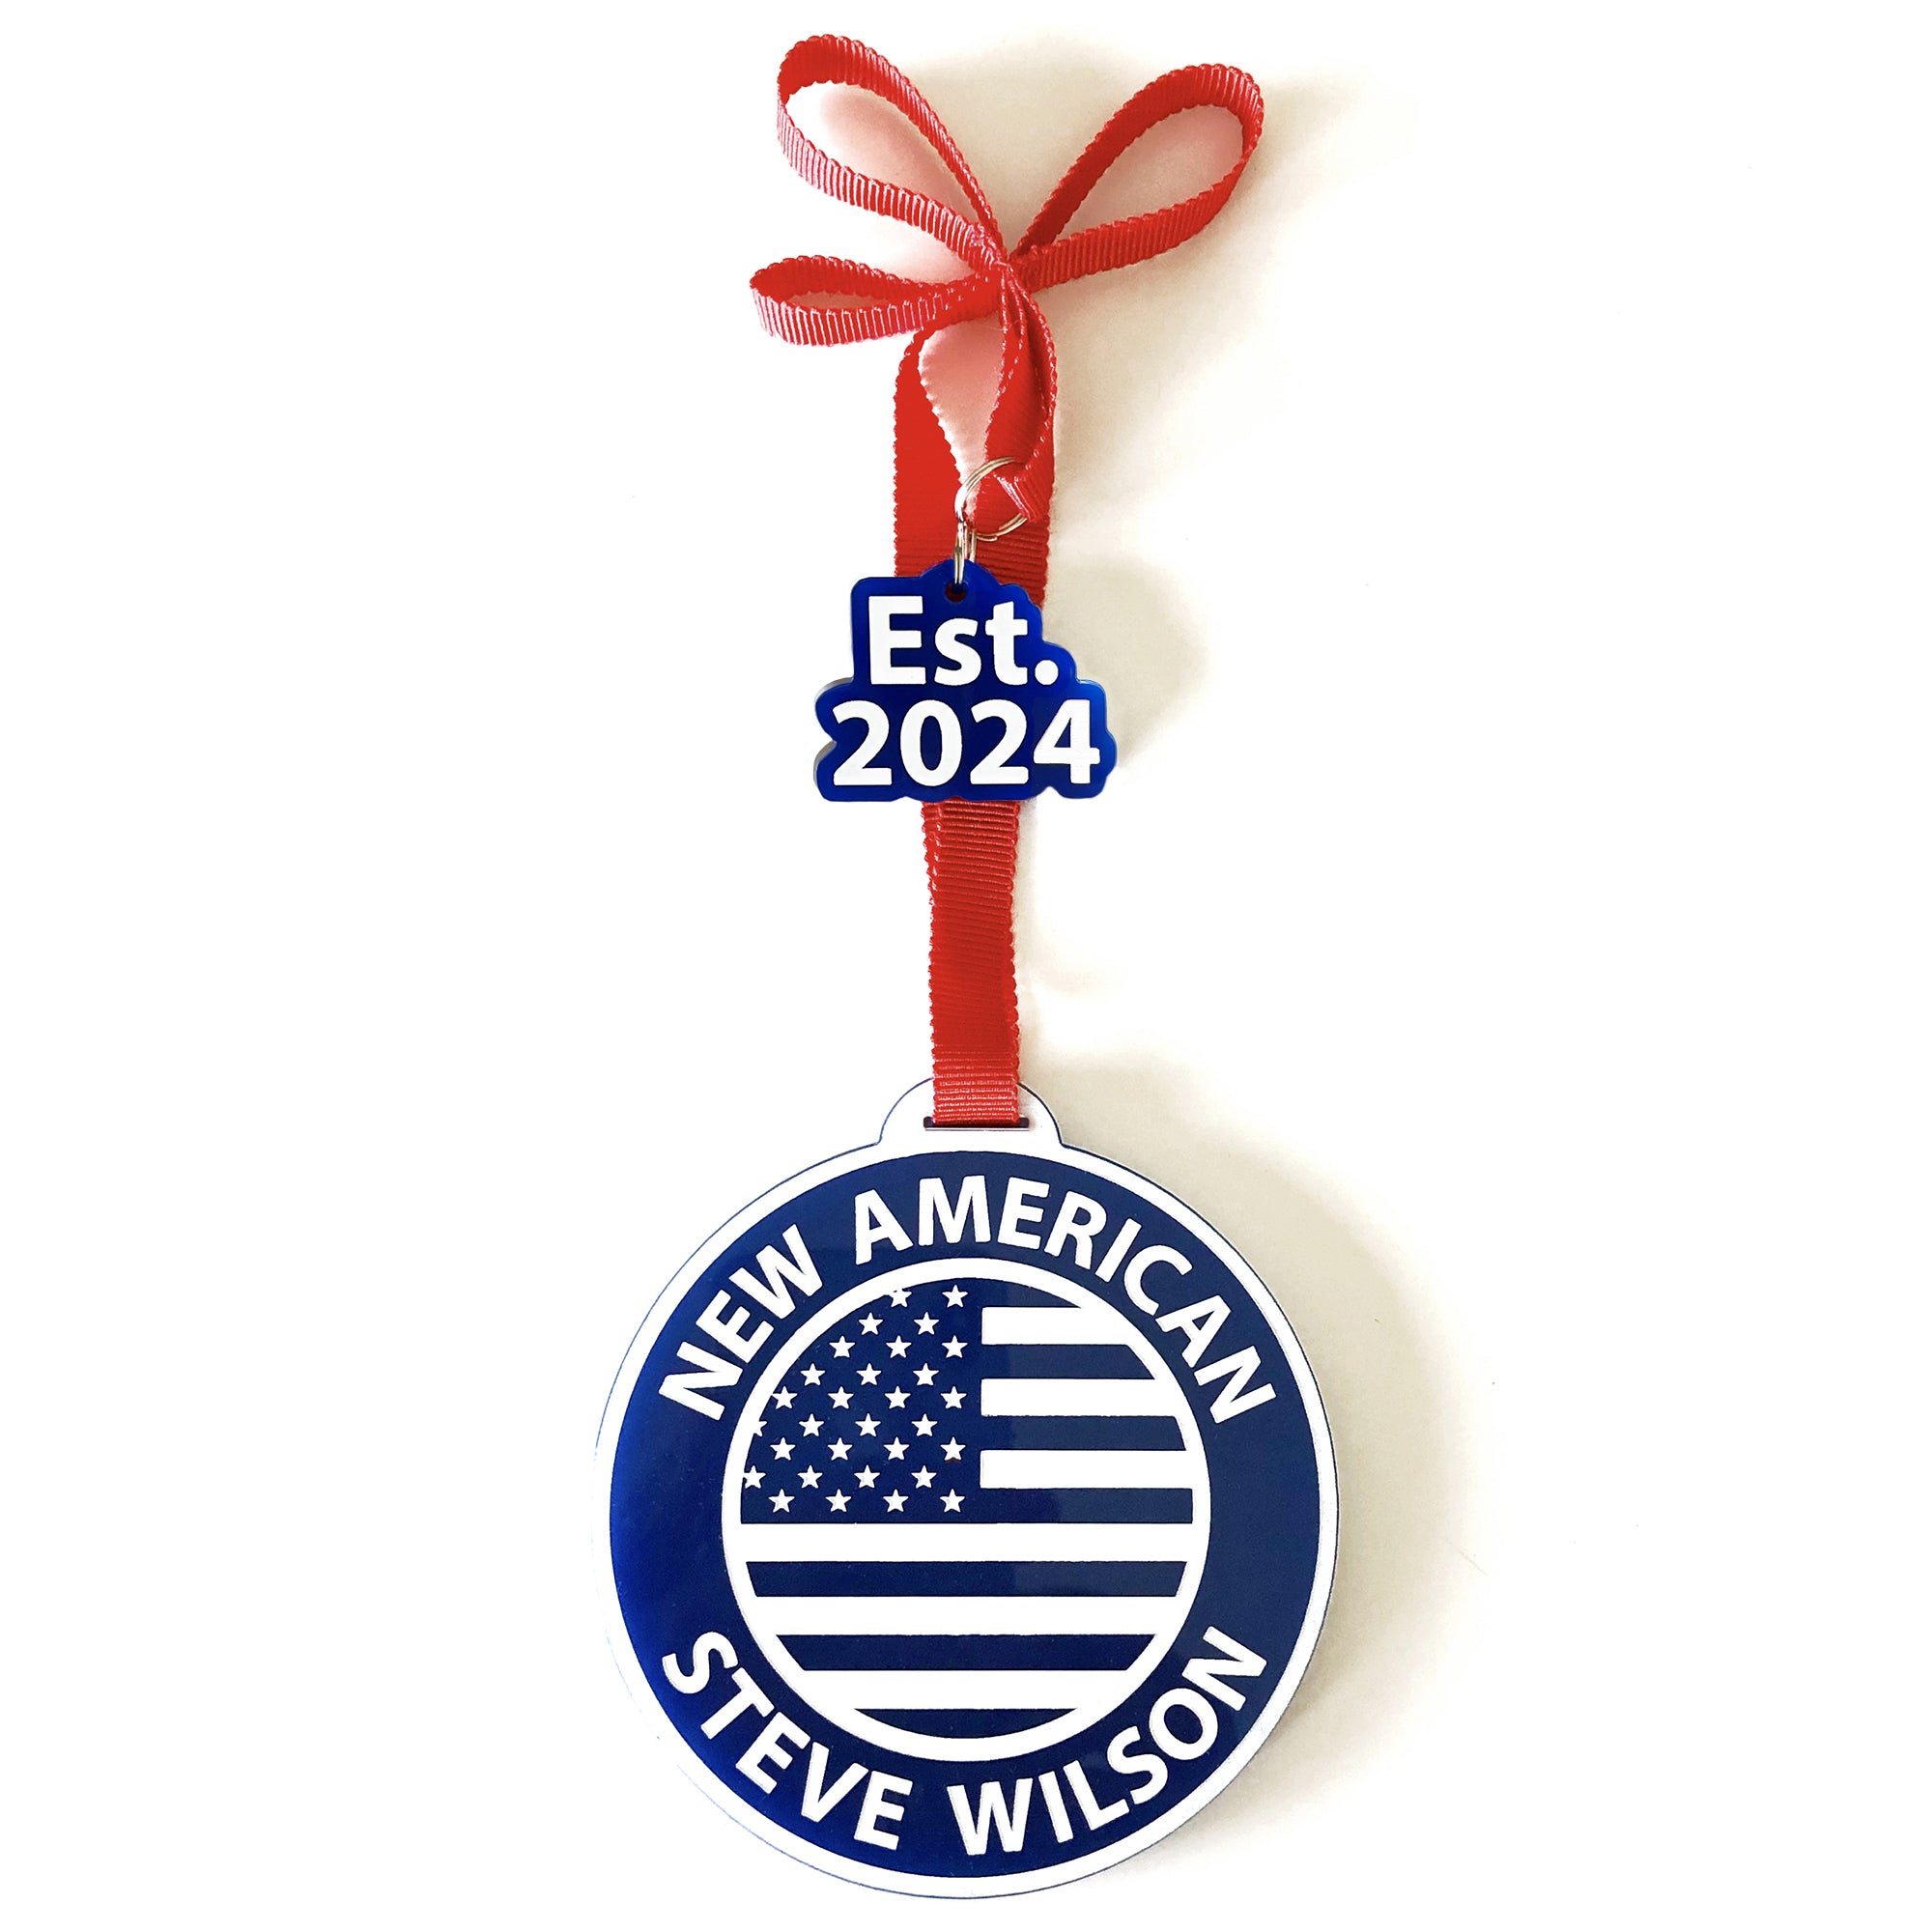 New American Citizen Ornament | Brit and Bee